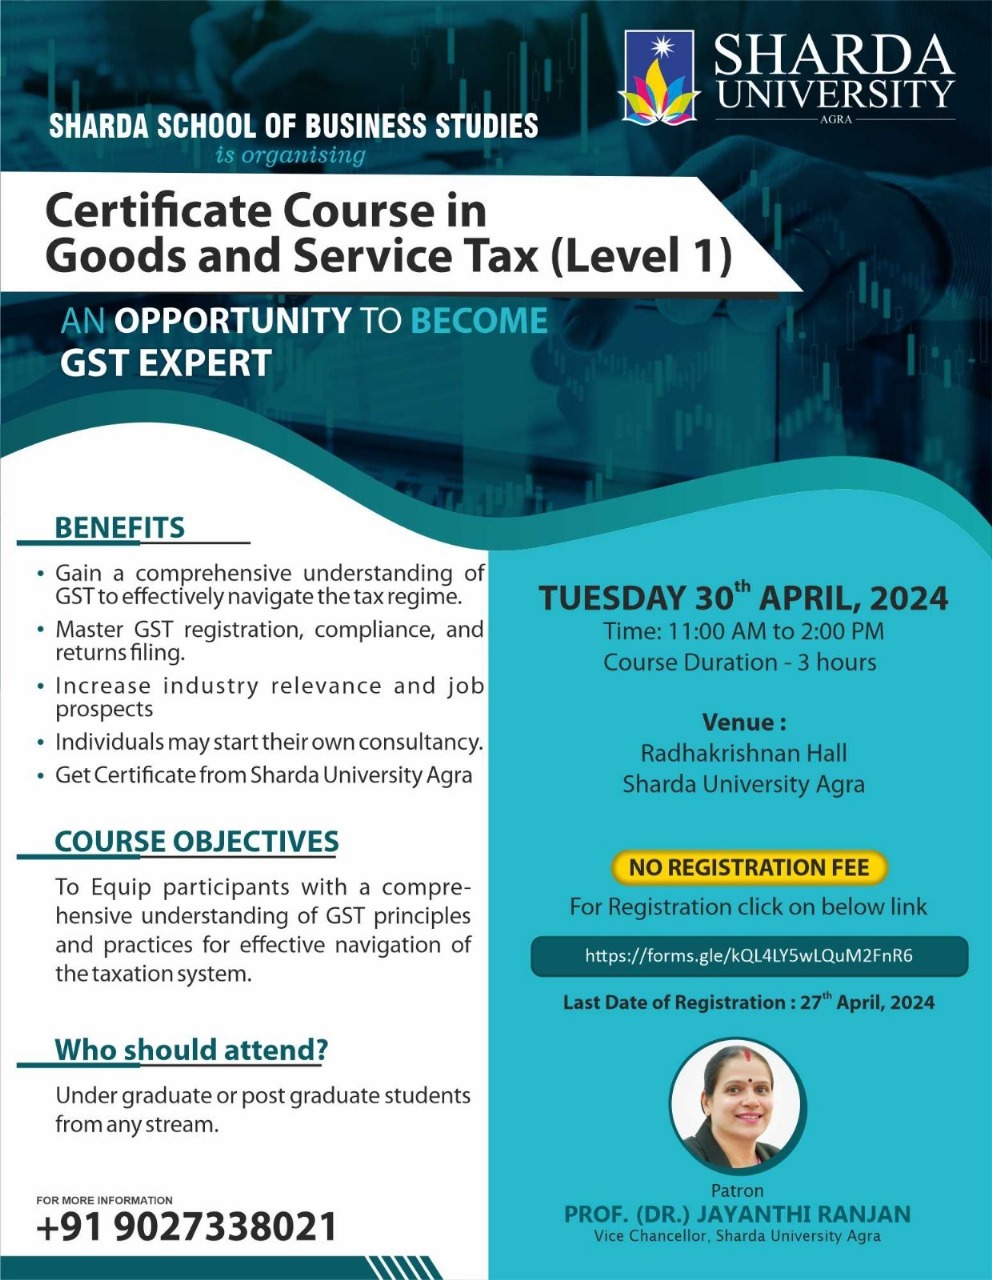 Certificate Course on Goods and Service Tax (Level 1)